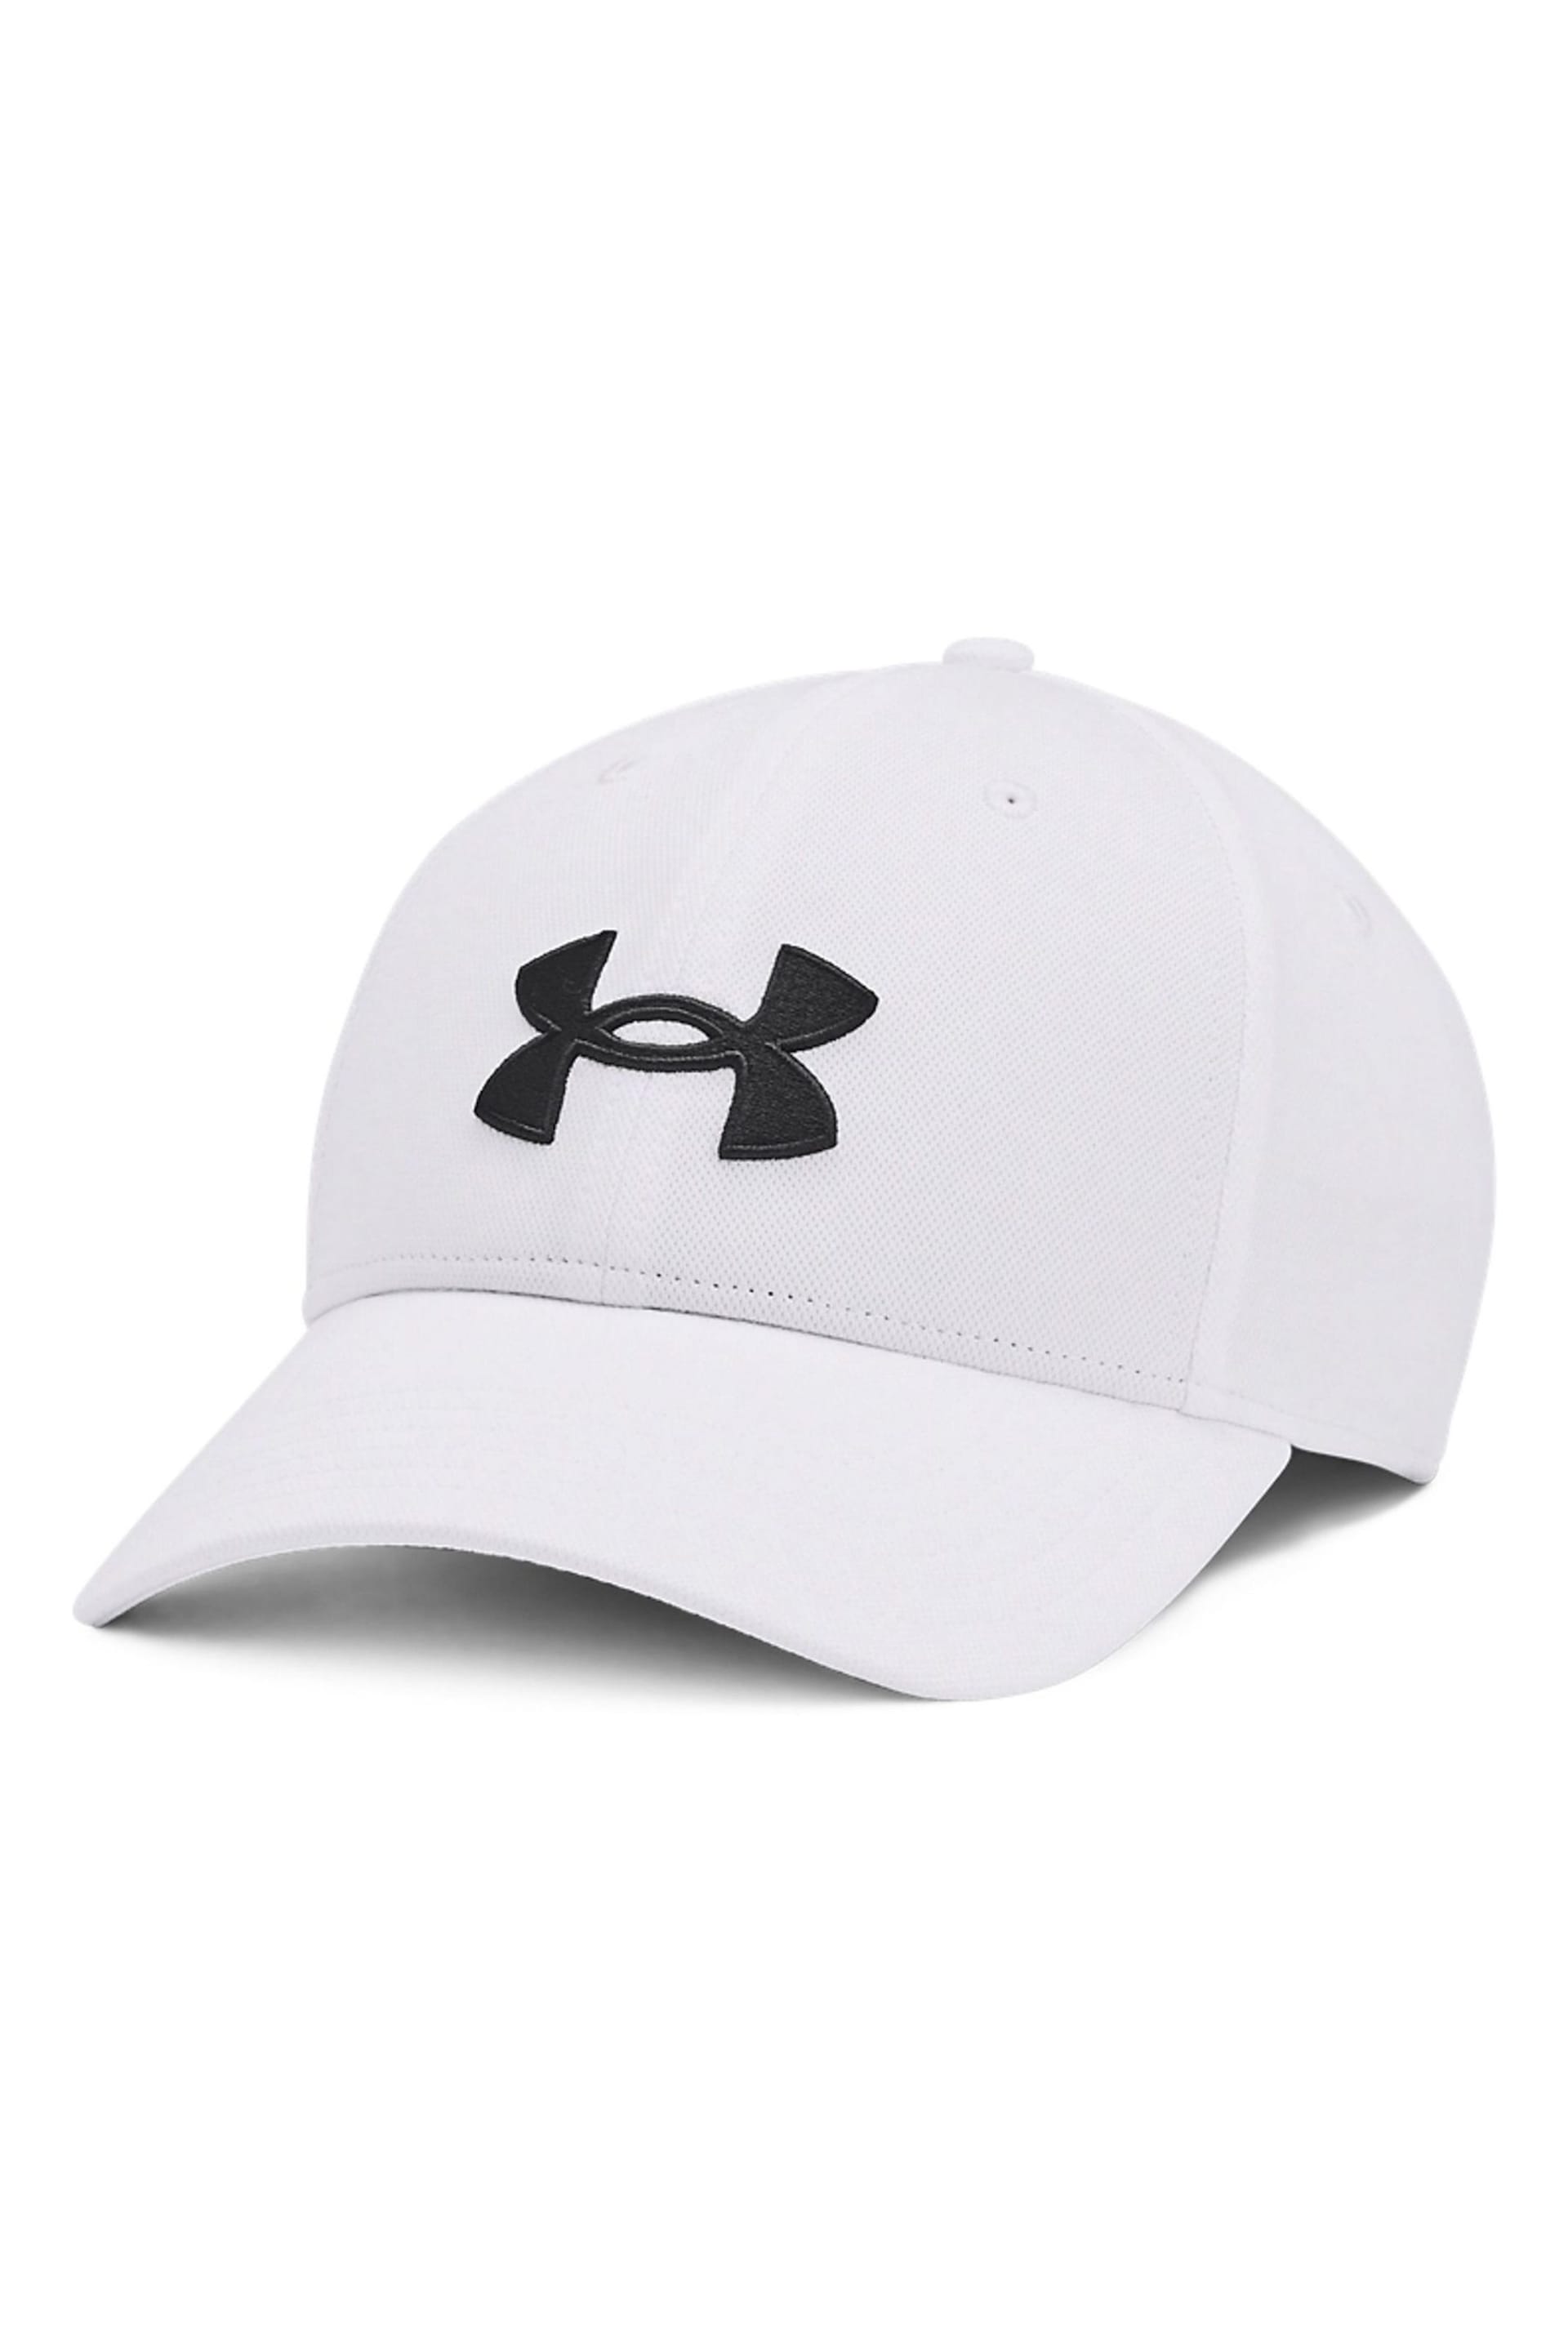 Under Armour White Blitzing Adjustable Cap - Image 1 of 3